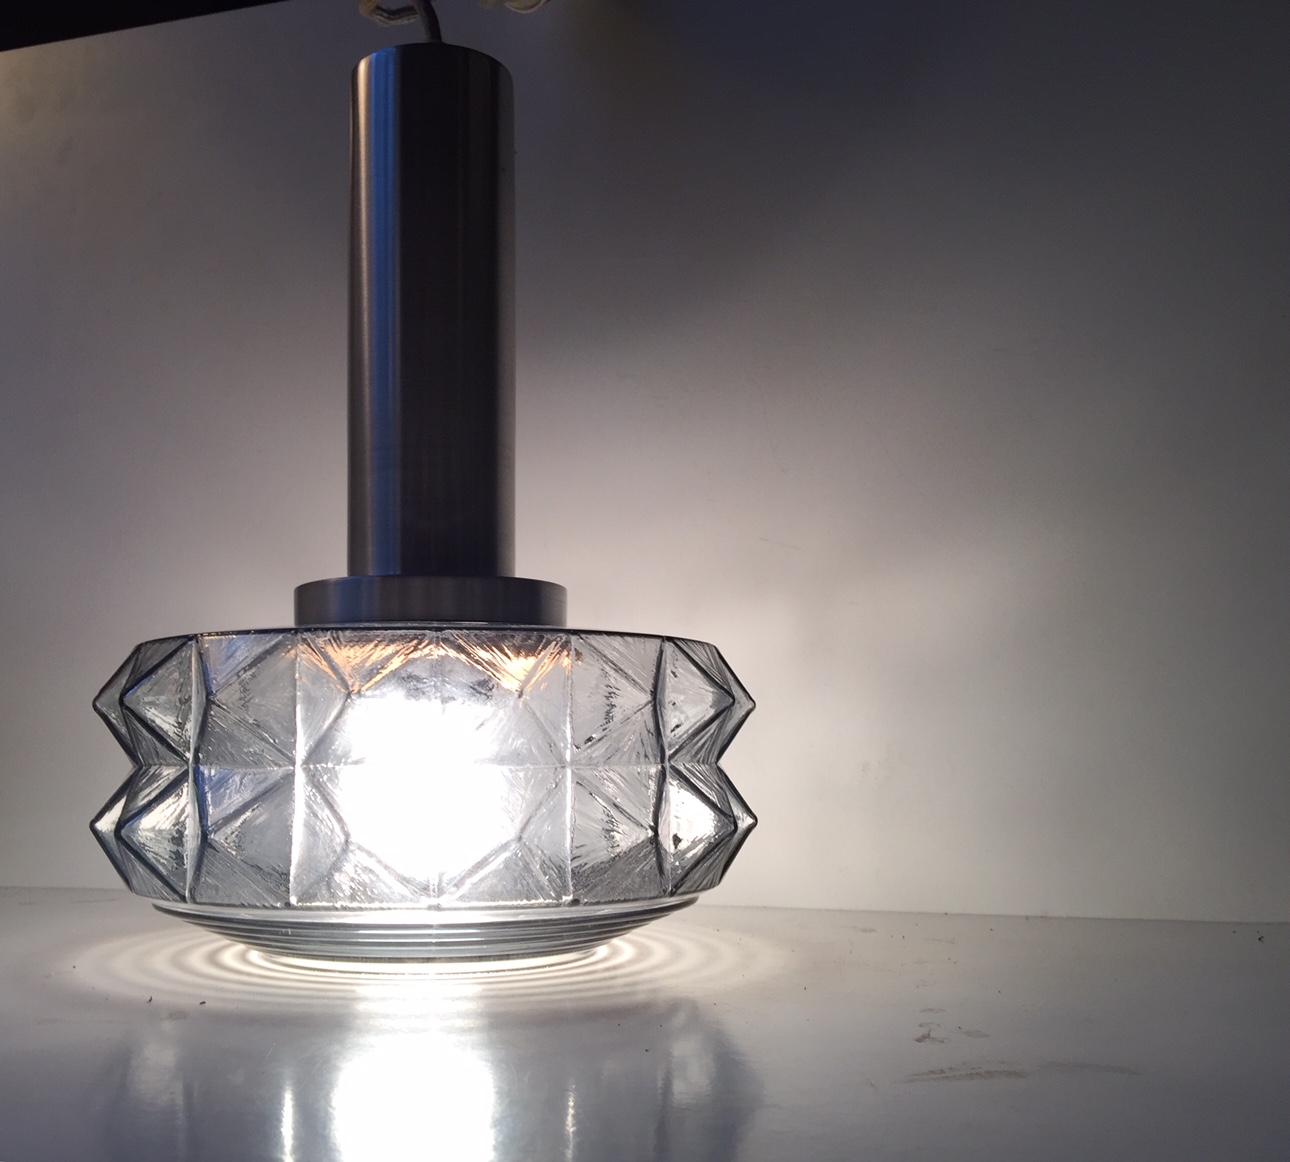 Brushed Midcentury Danish Ceiling Lamp in Smoke Glass from Vitrika, 1960s For Sale